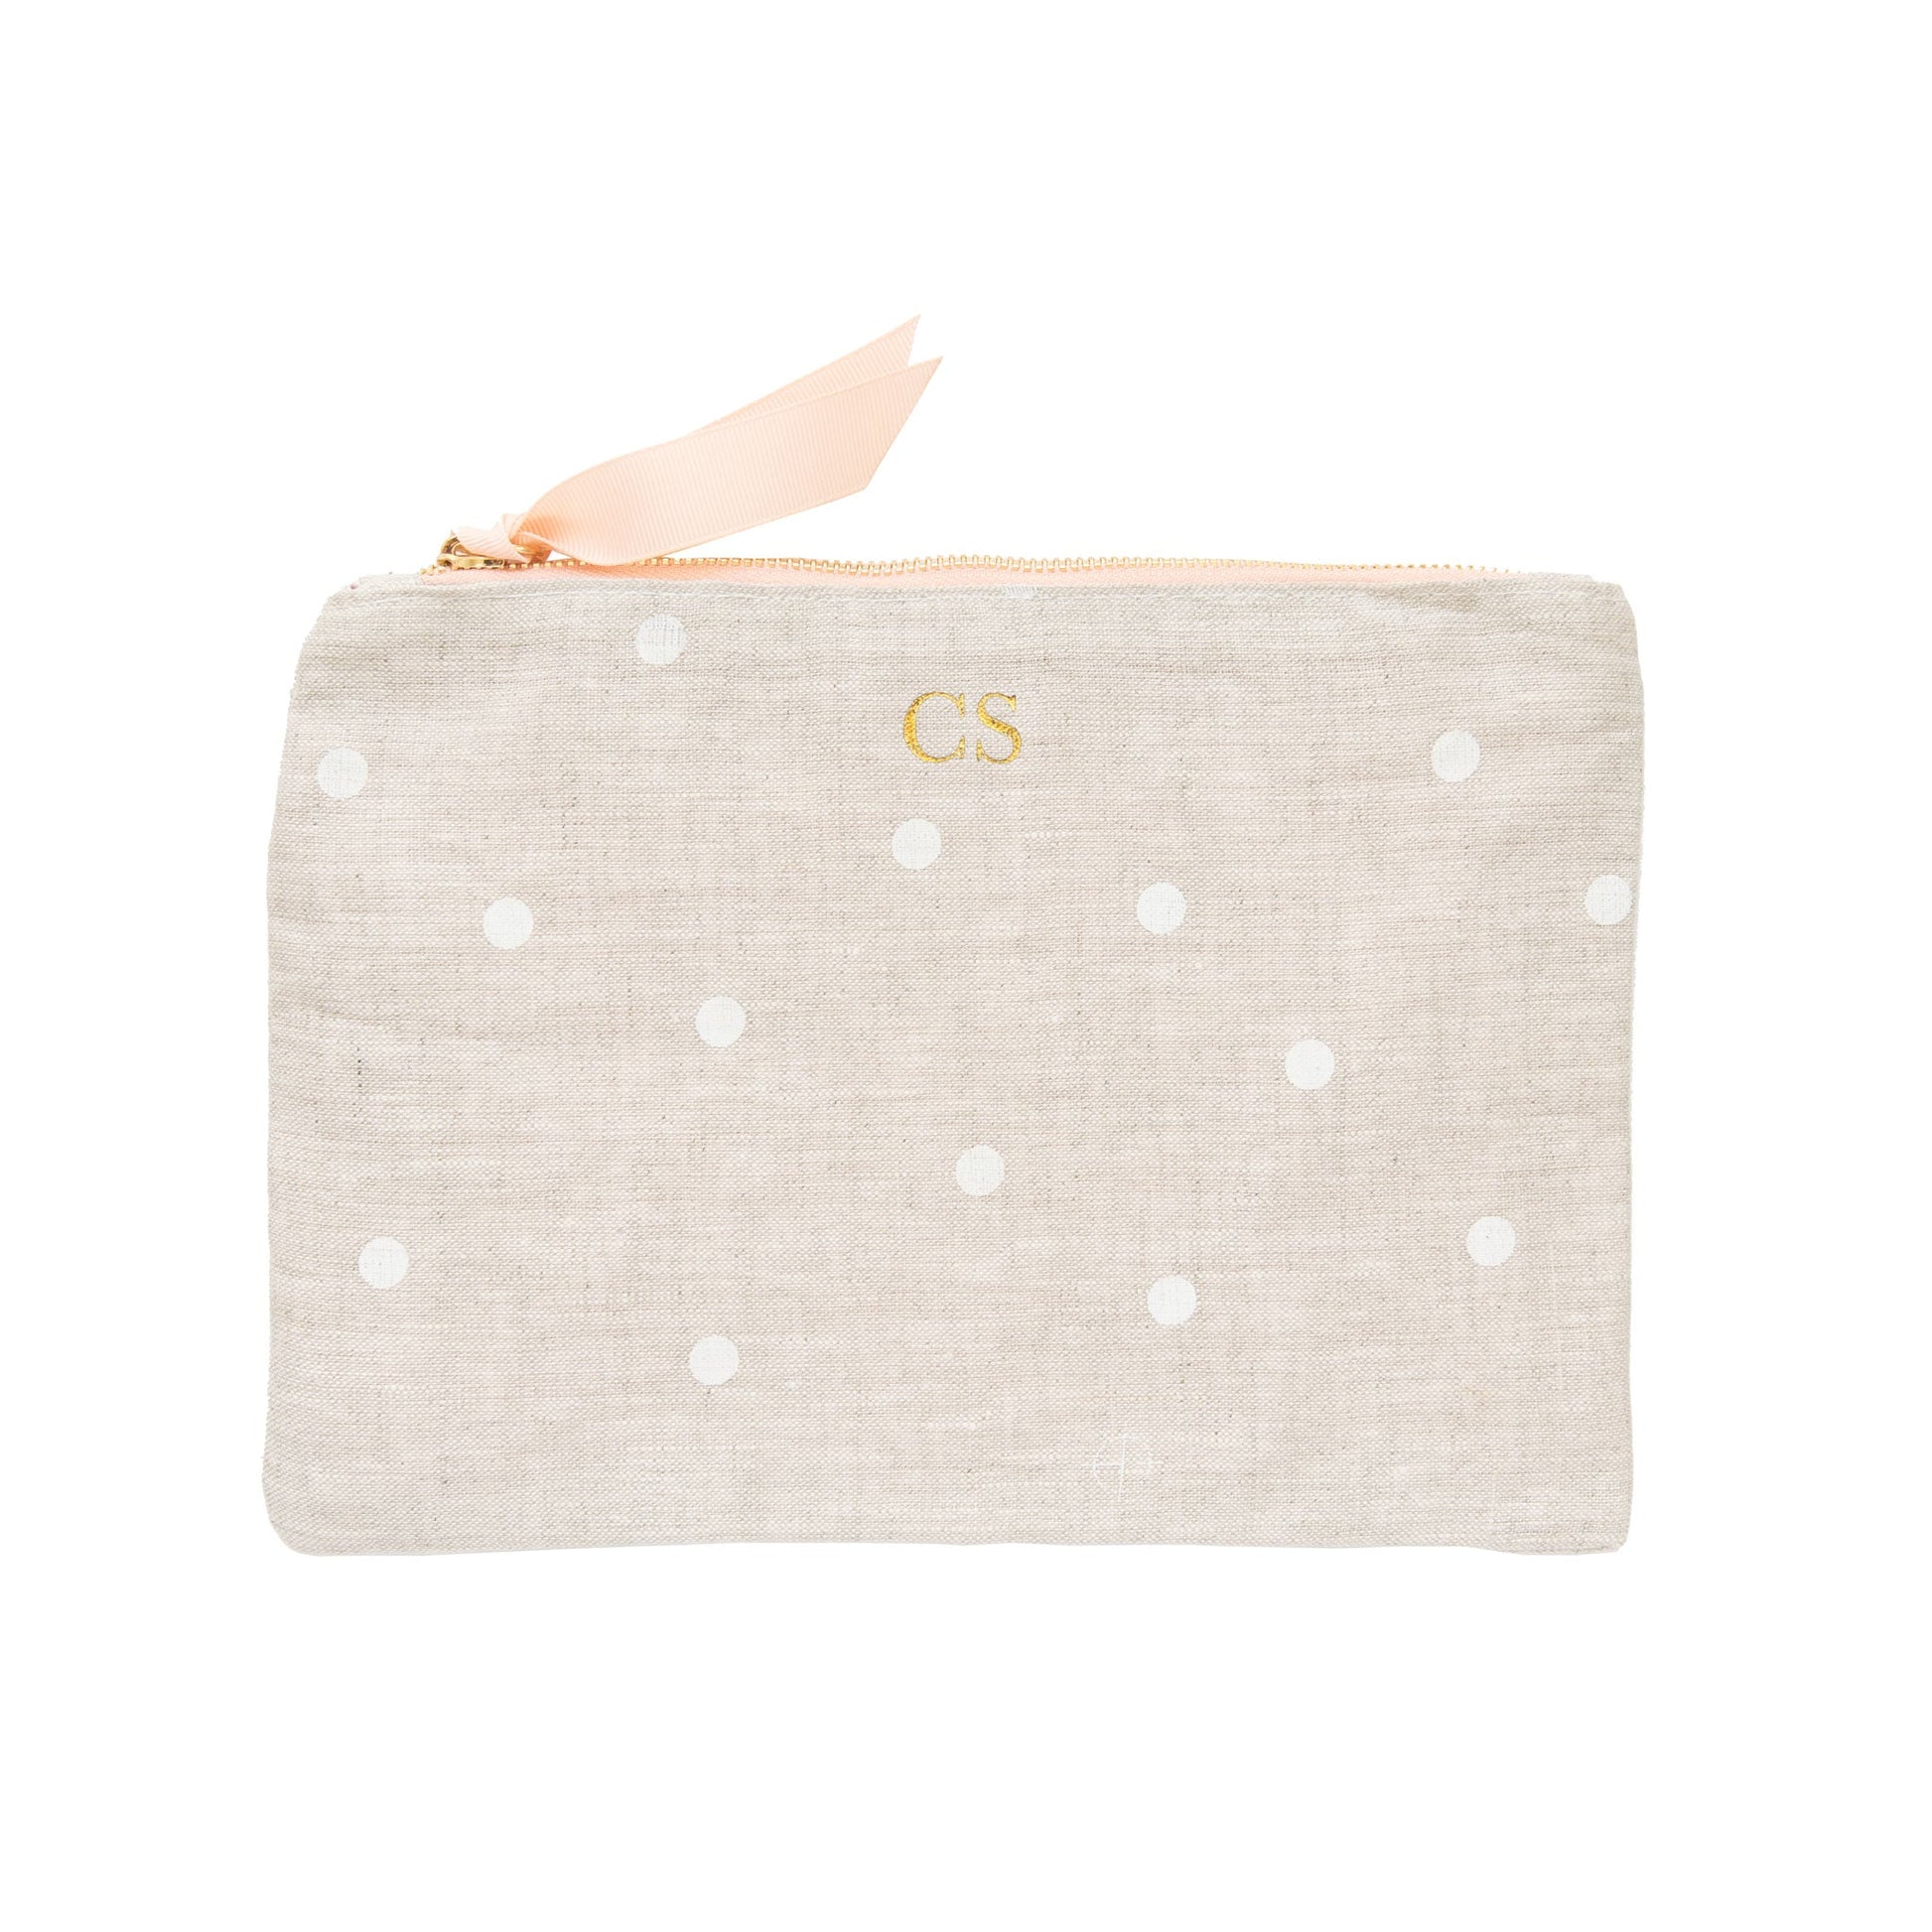 Flax and white dot fabric pouch with gold monogram initials